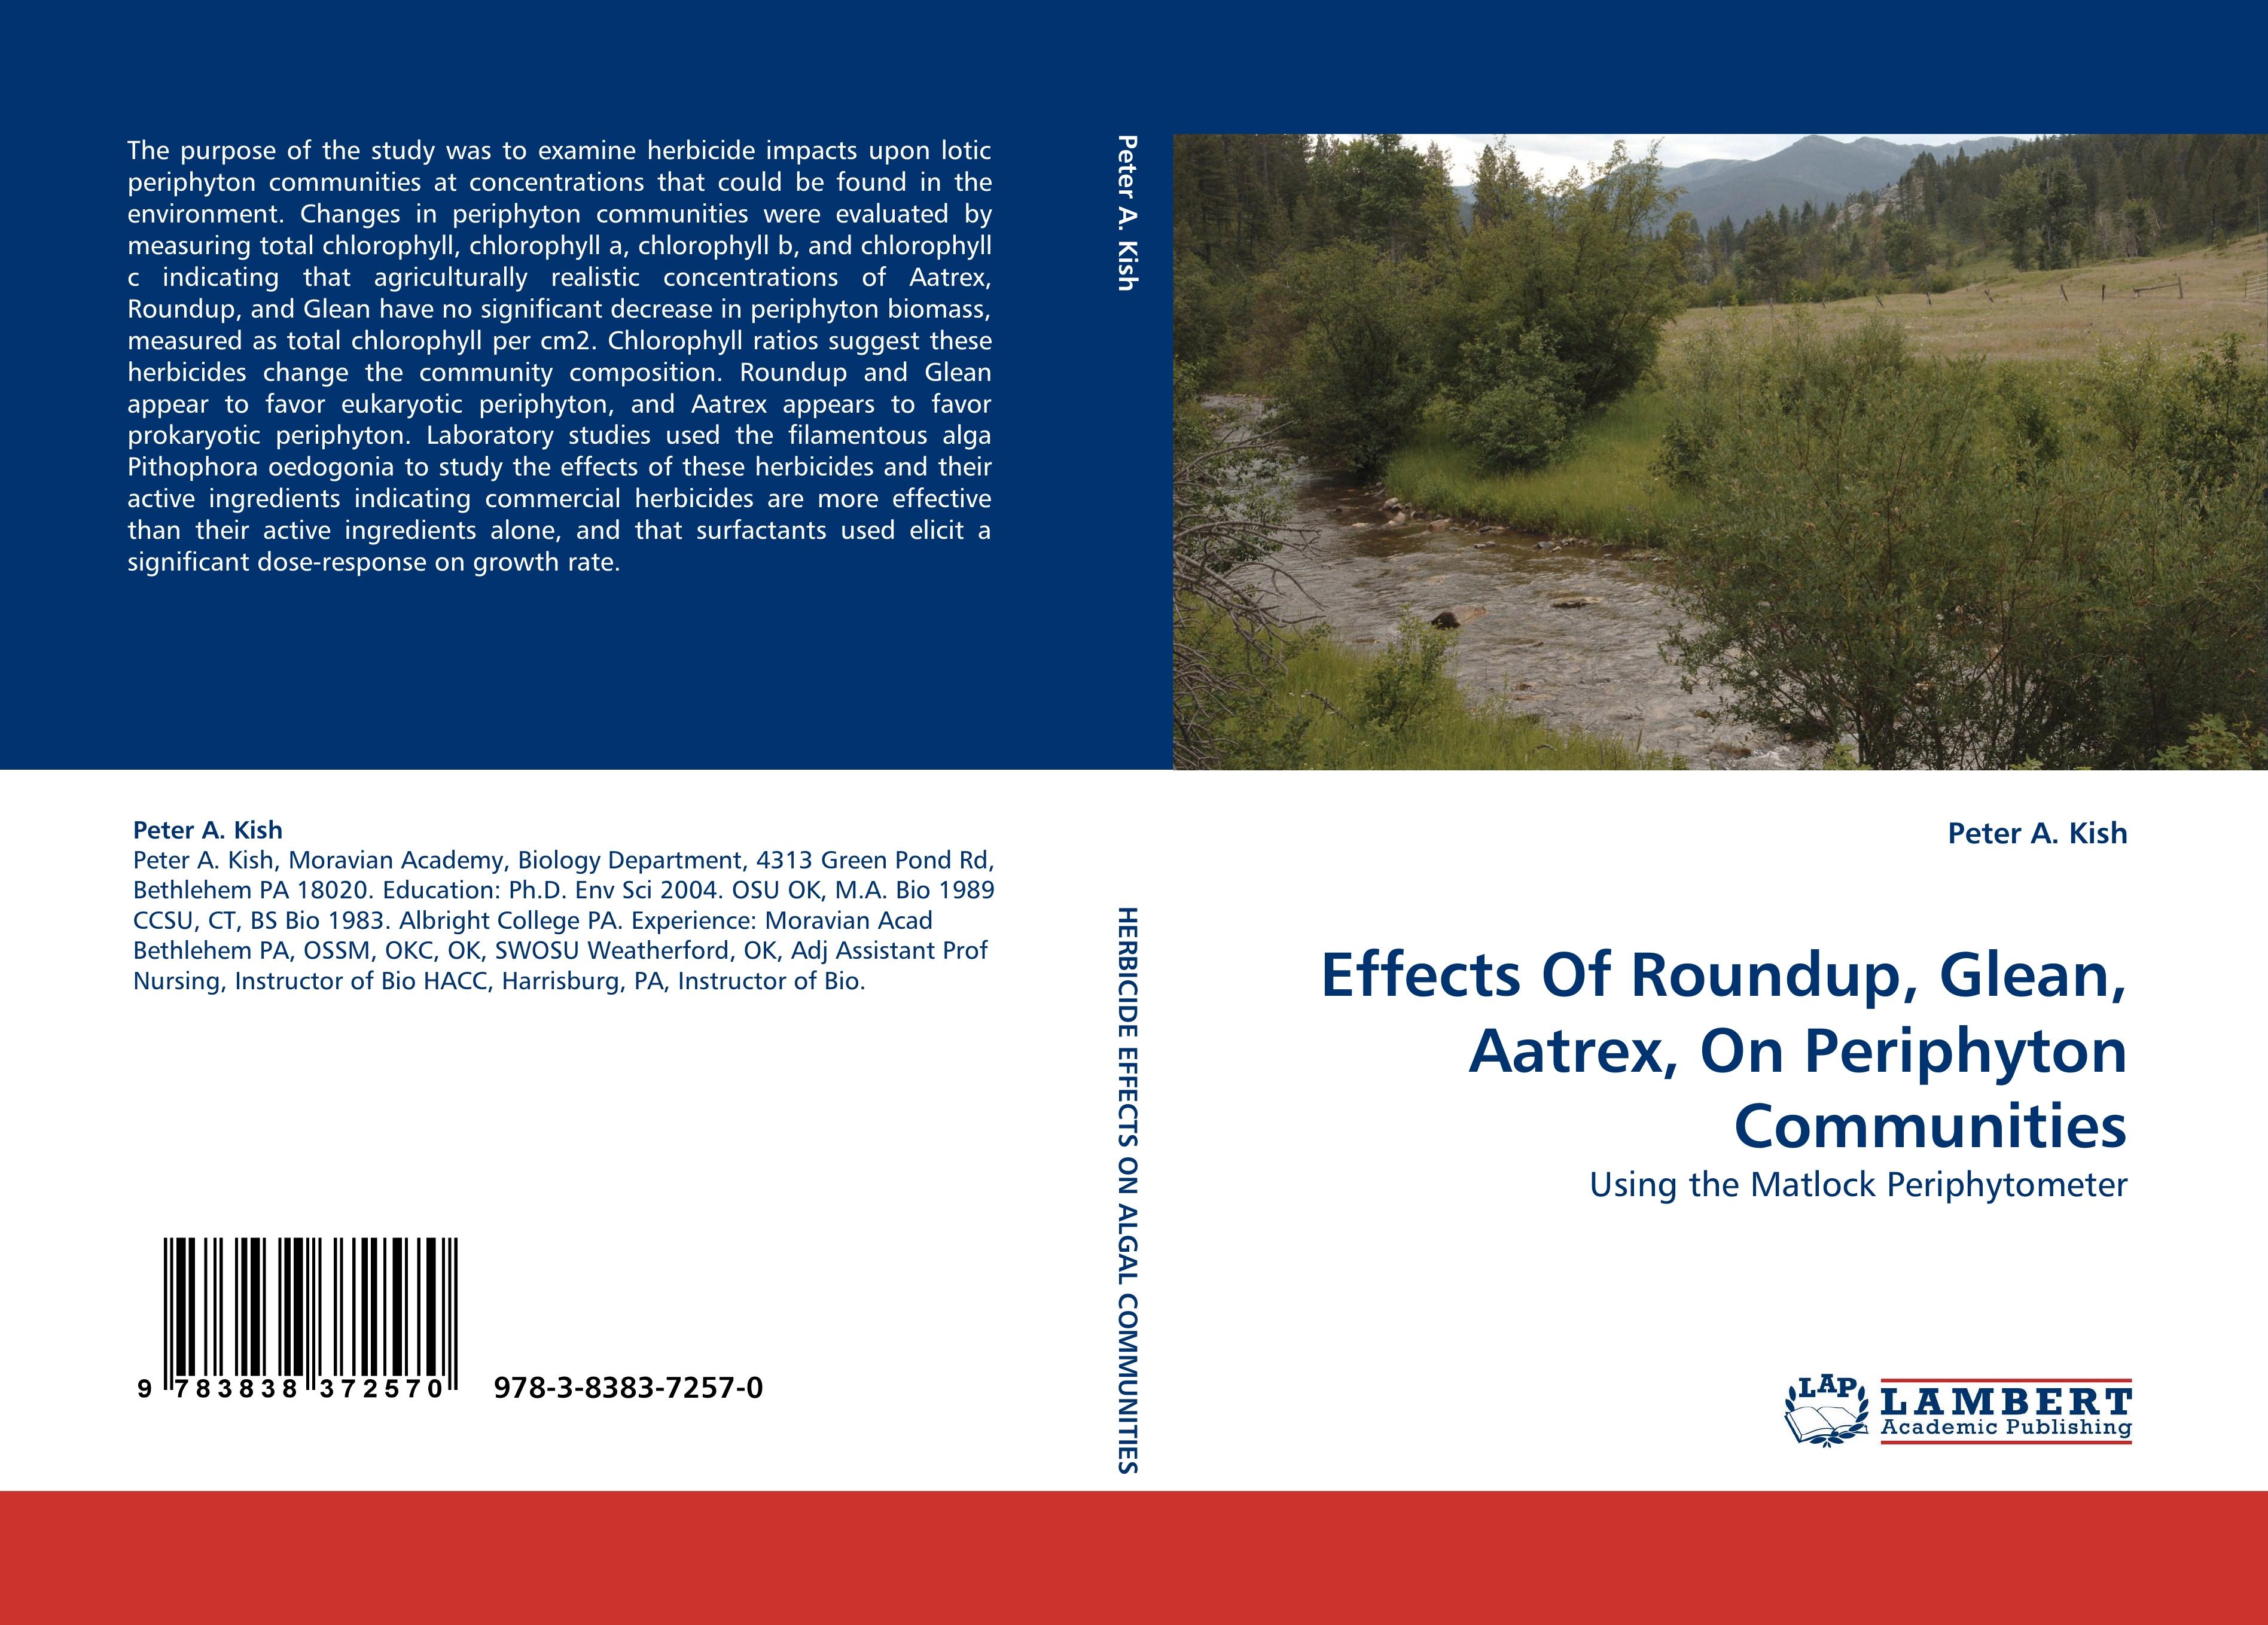 Effects Of Roundup, Glean, Aatrex, On Periphyton Communities / Using the Matlock Periphytometer / Peter A. Kish / Taschenbuch / Paperback / 184 S. / Englisch / 2010 / LAP LAMBERT Academic Publishing - Kish, Peter A.